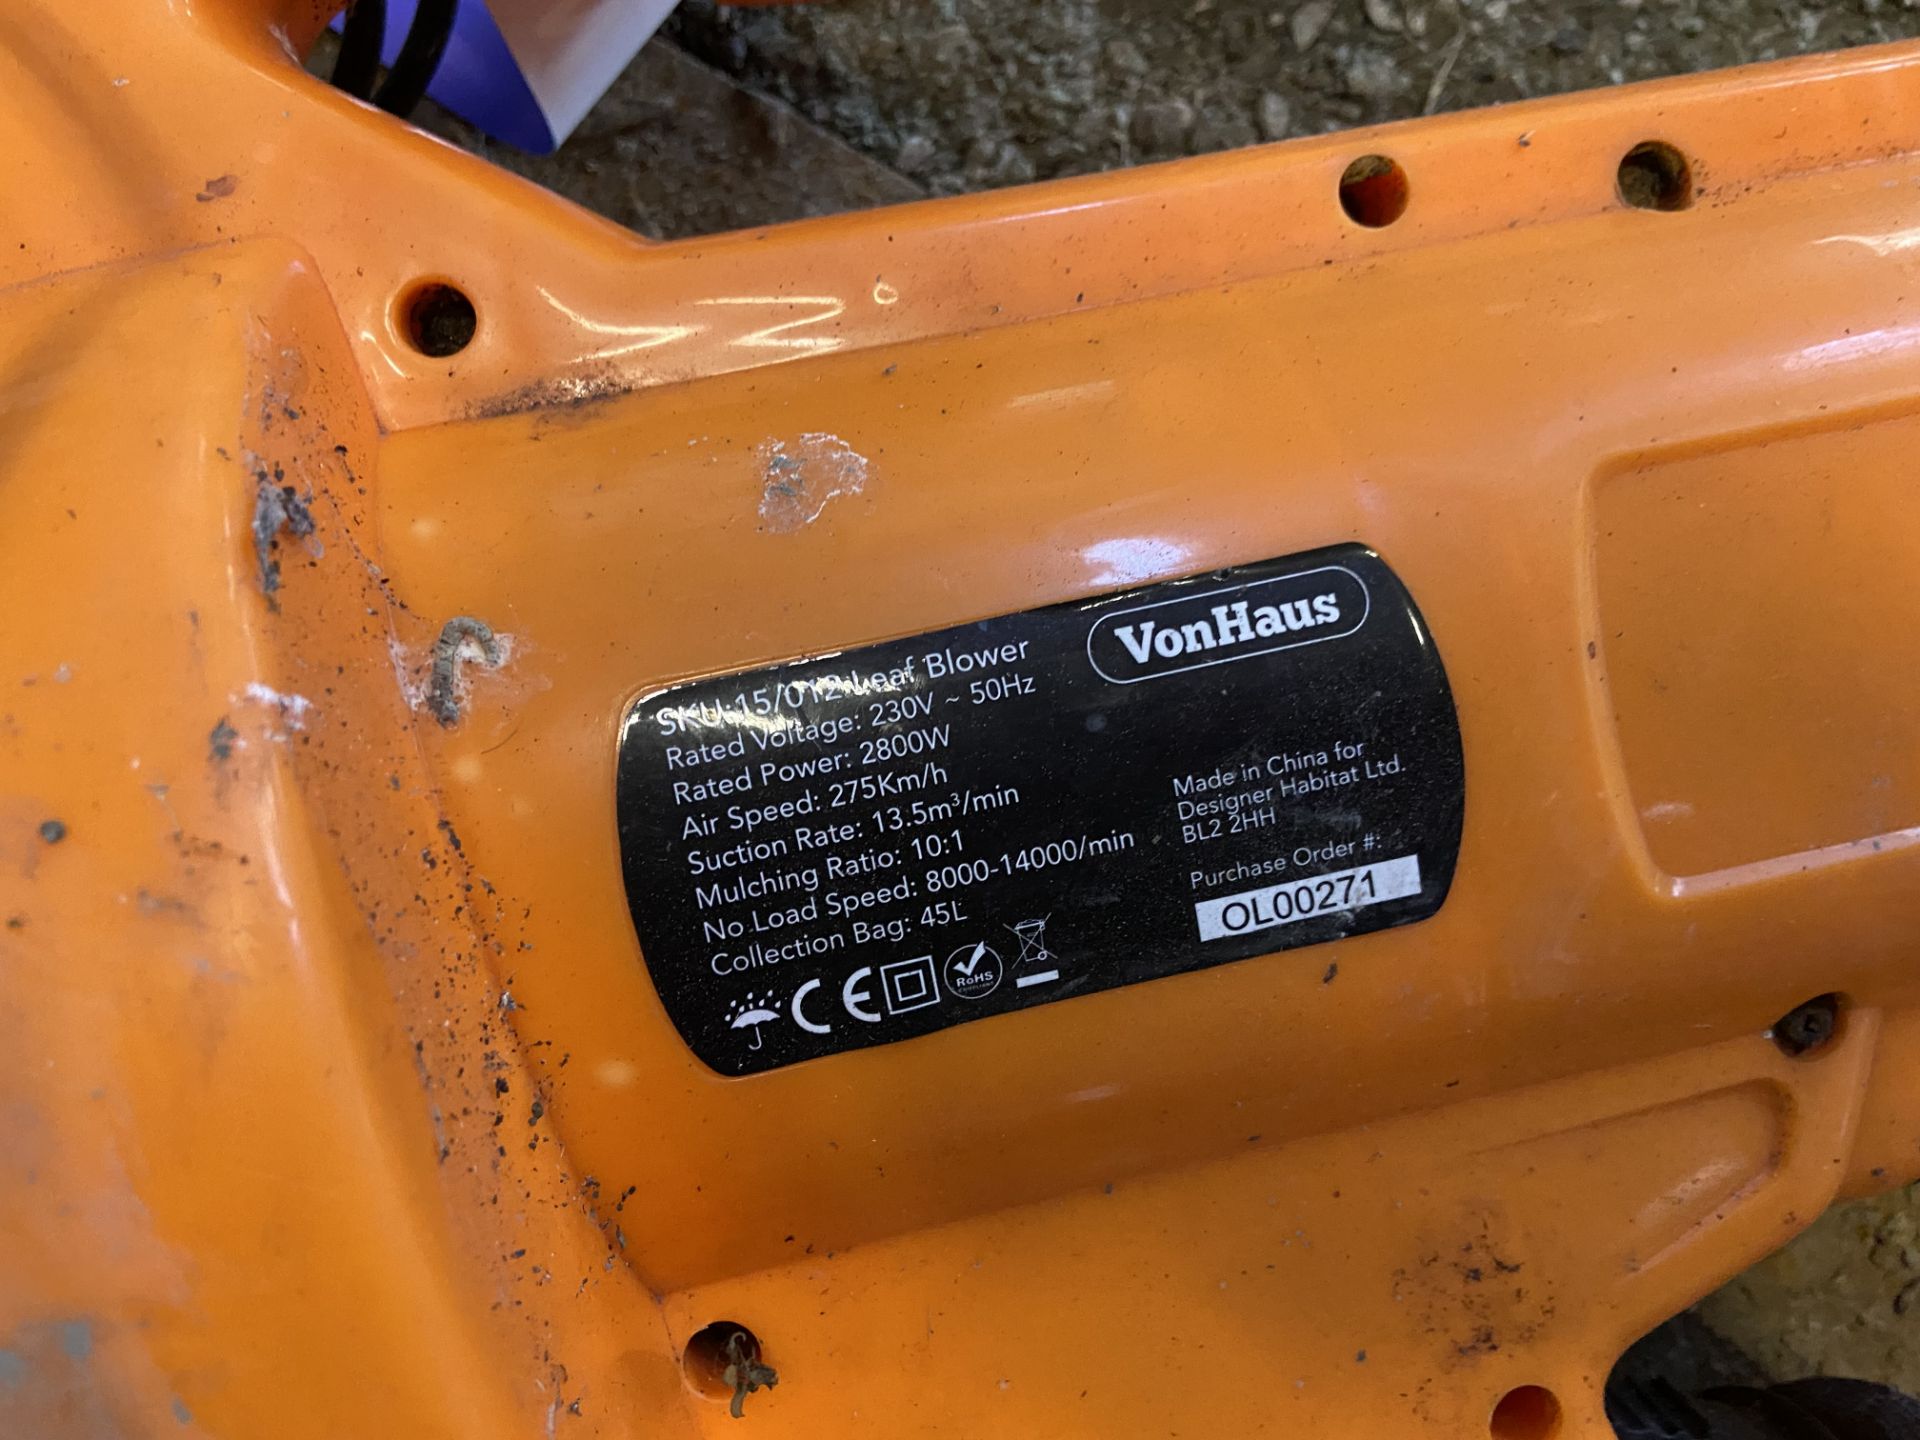 VonHaus 15/012 Portable Electric Leaf Blower, 240V (please note - this lot is NOT subject to VAT - Image 2 of 2